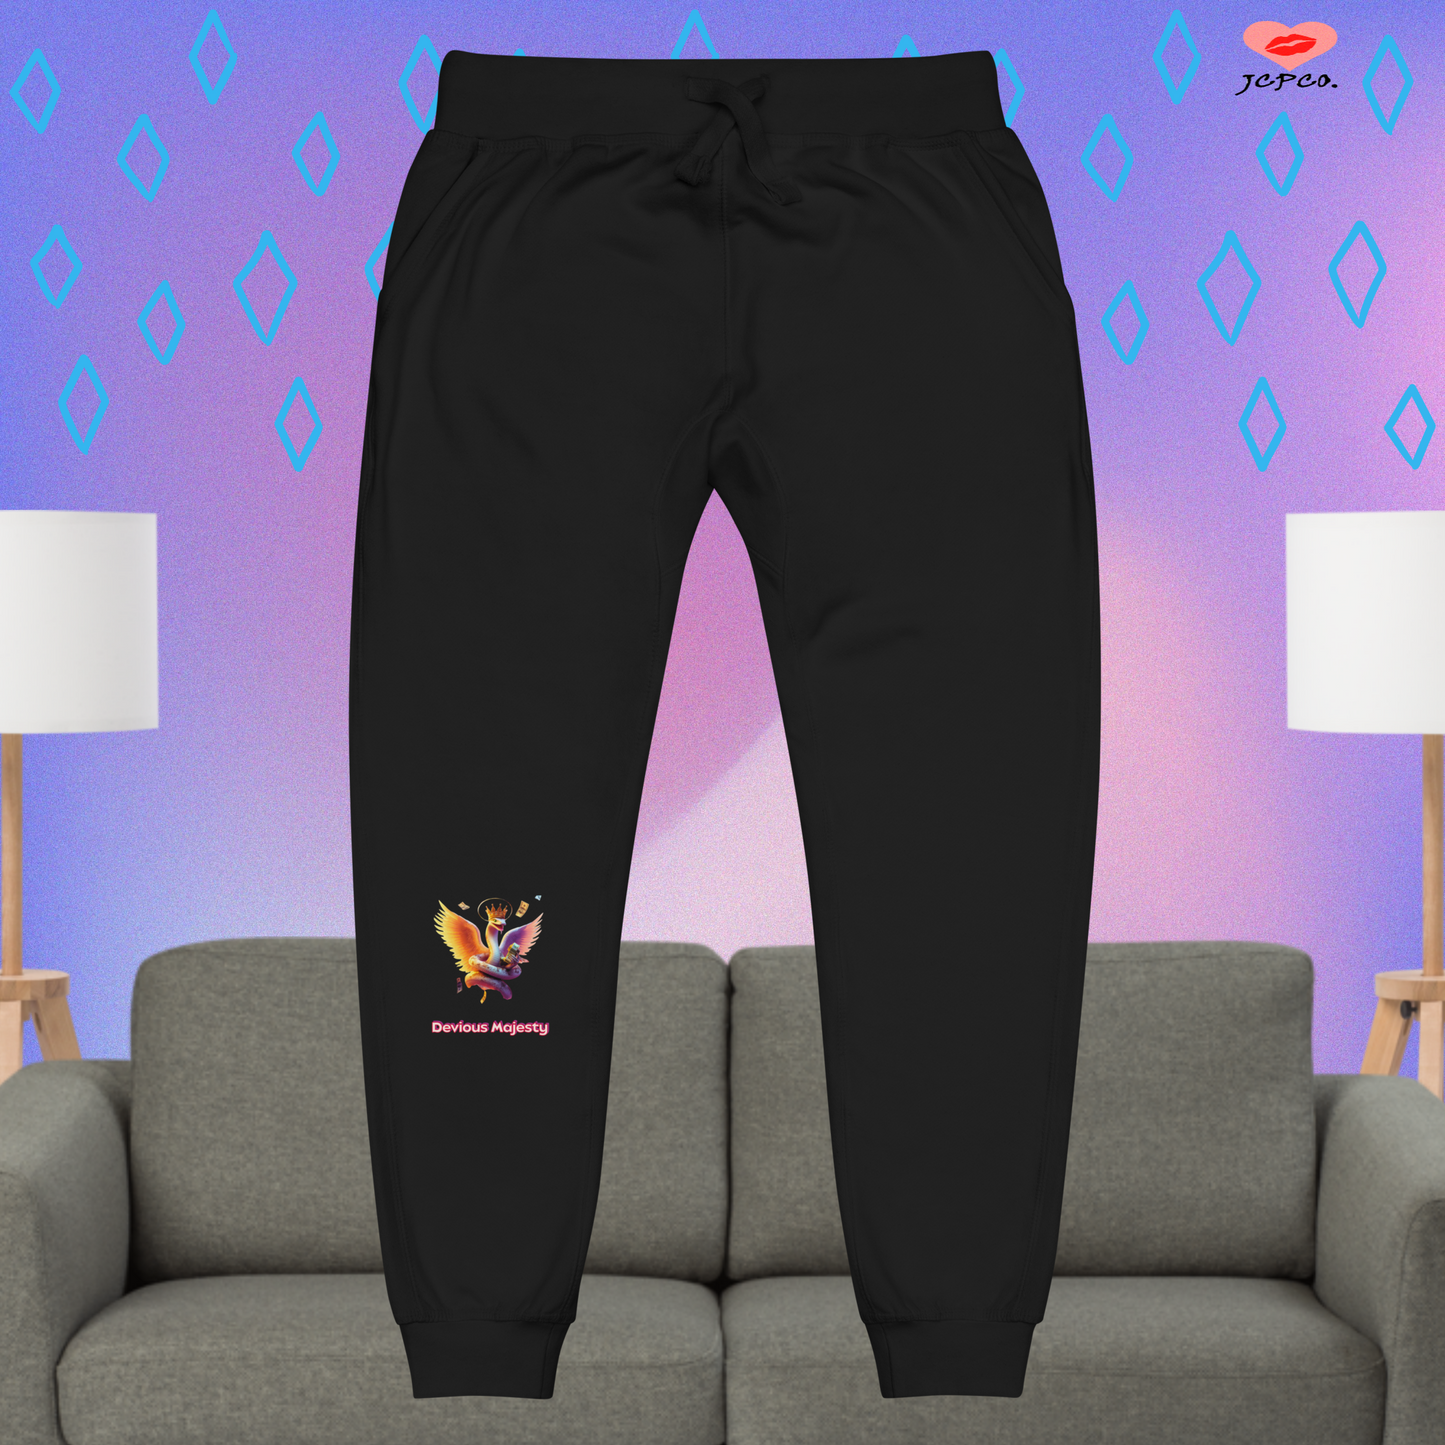 👑Devious Majesty Serpent's Swag 🐍 From Clouds to Cash💵Unisex fleece sweatpants👖